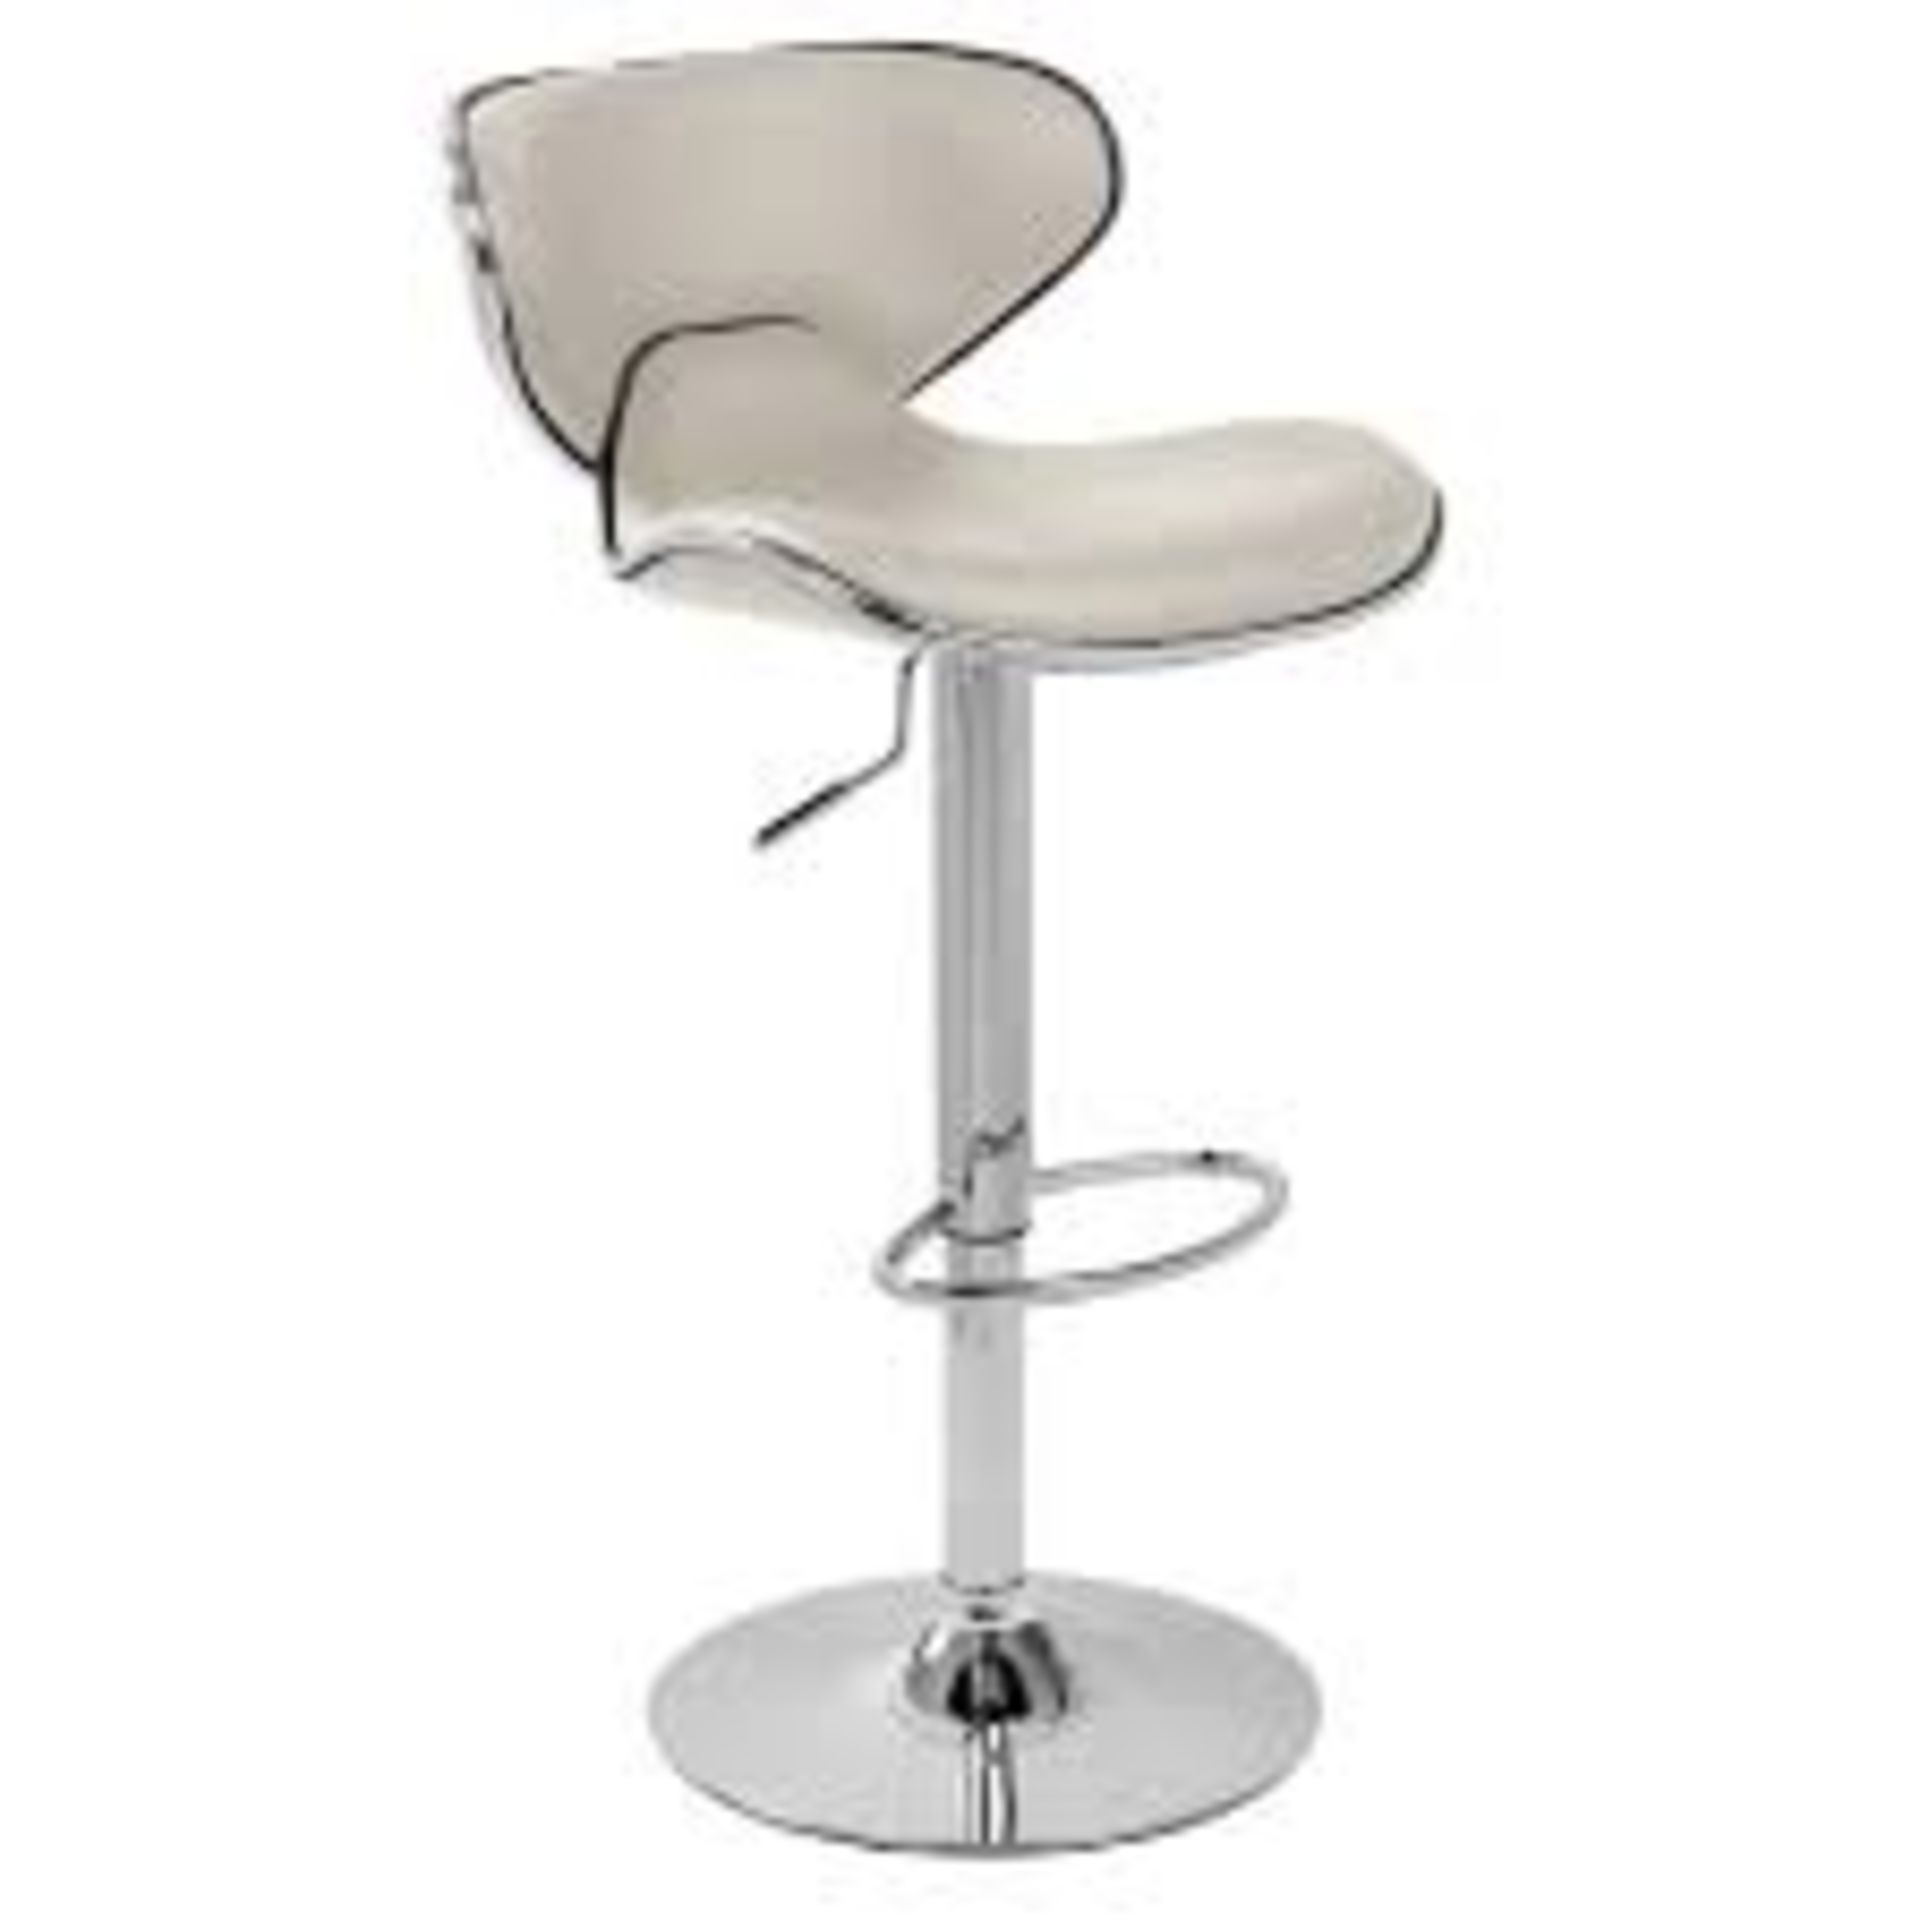 Boxed Black Leather And Chrome Gas Lift Swivle Bar Stool RRP £65 (18136)